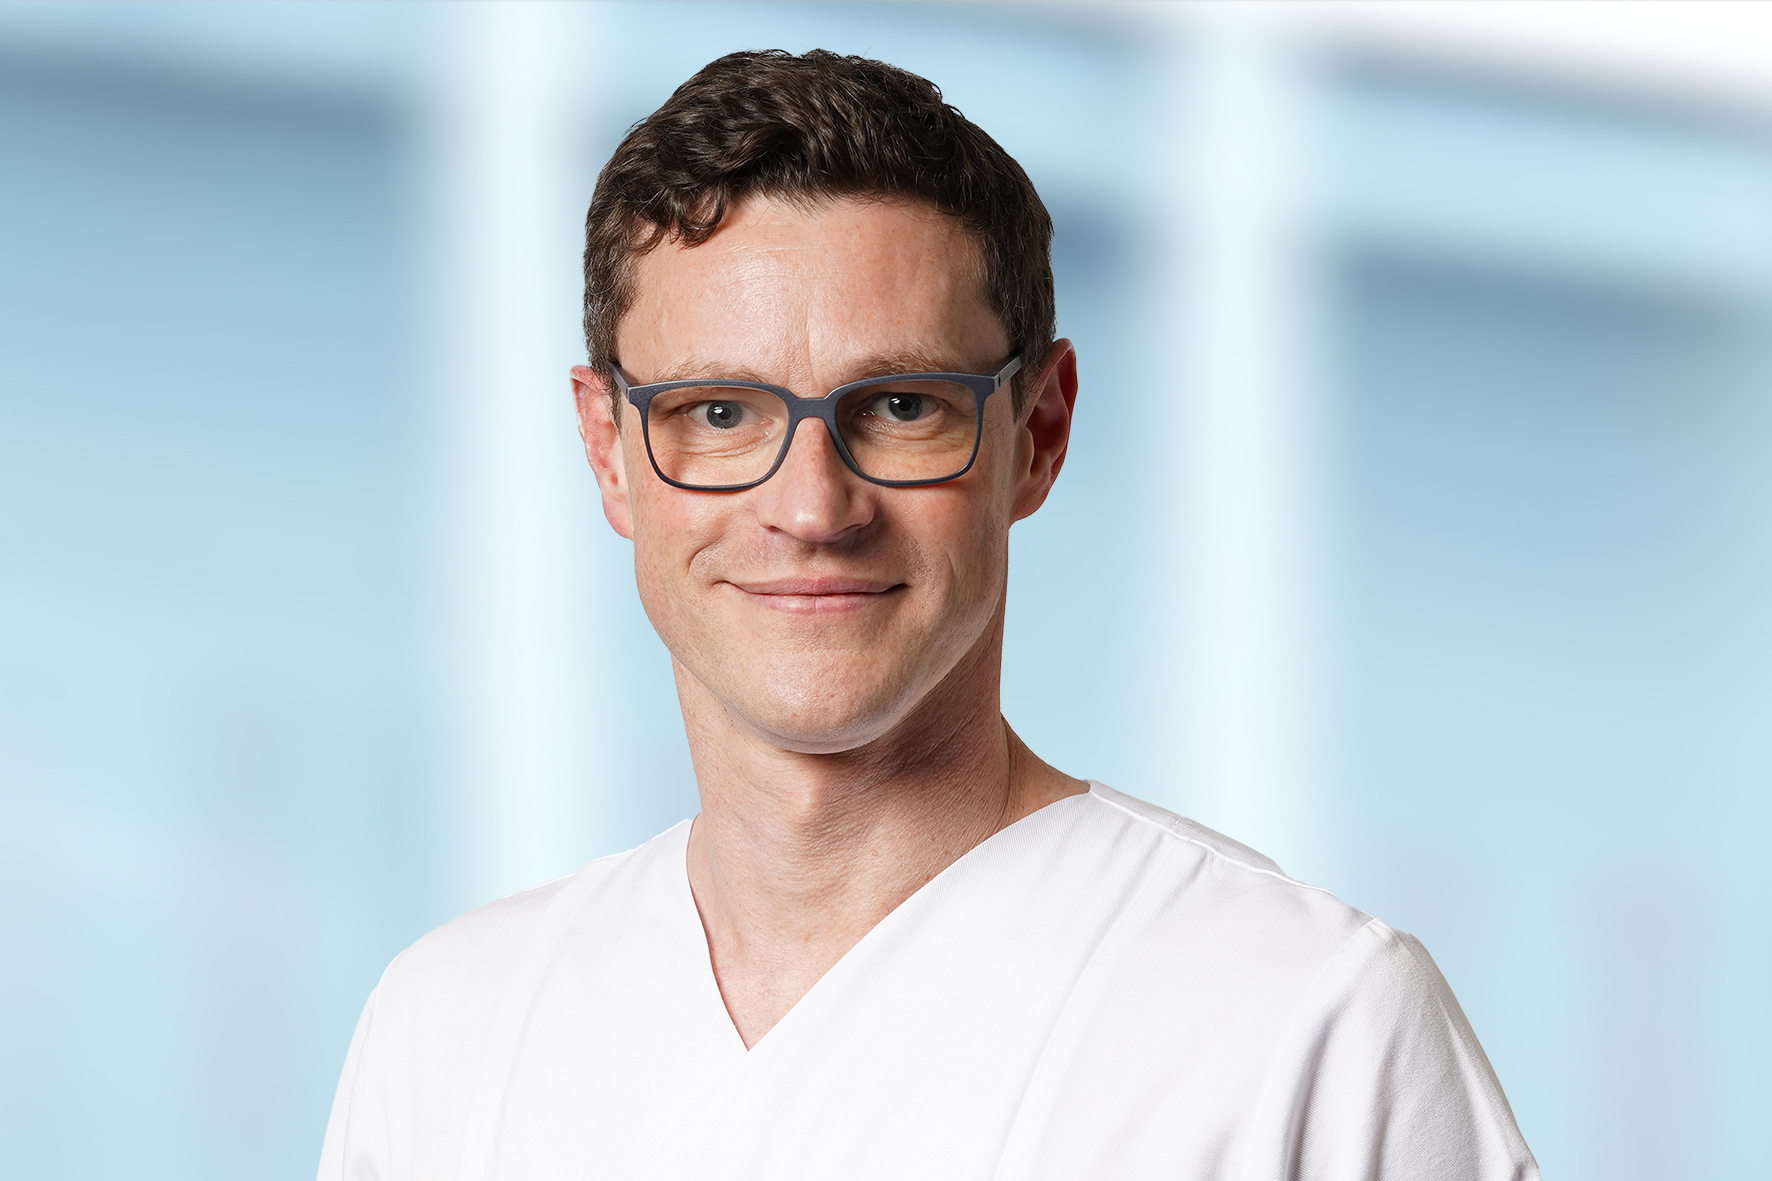 PD Dr. Dr. Philipp Poxleitner